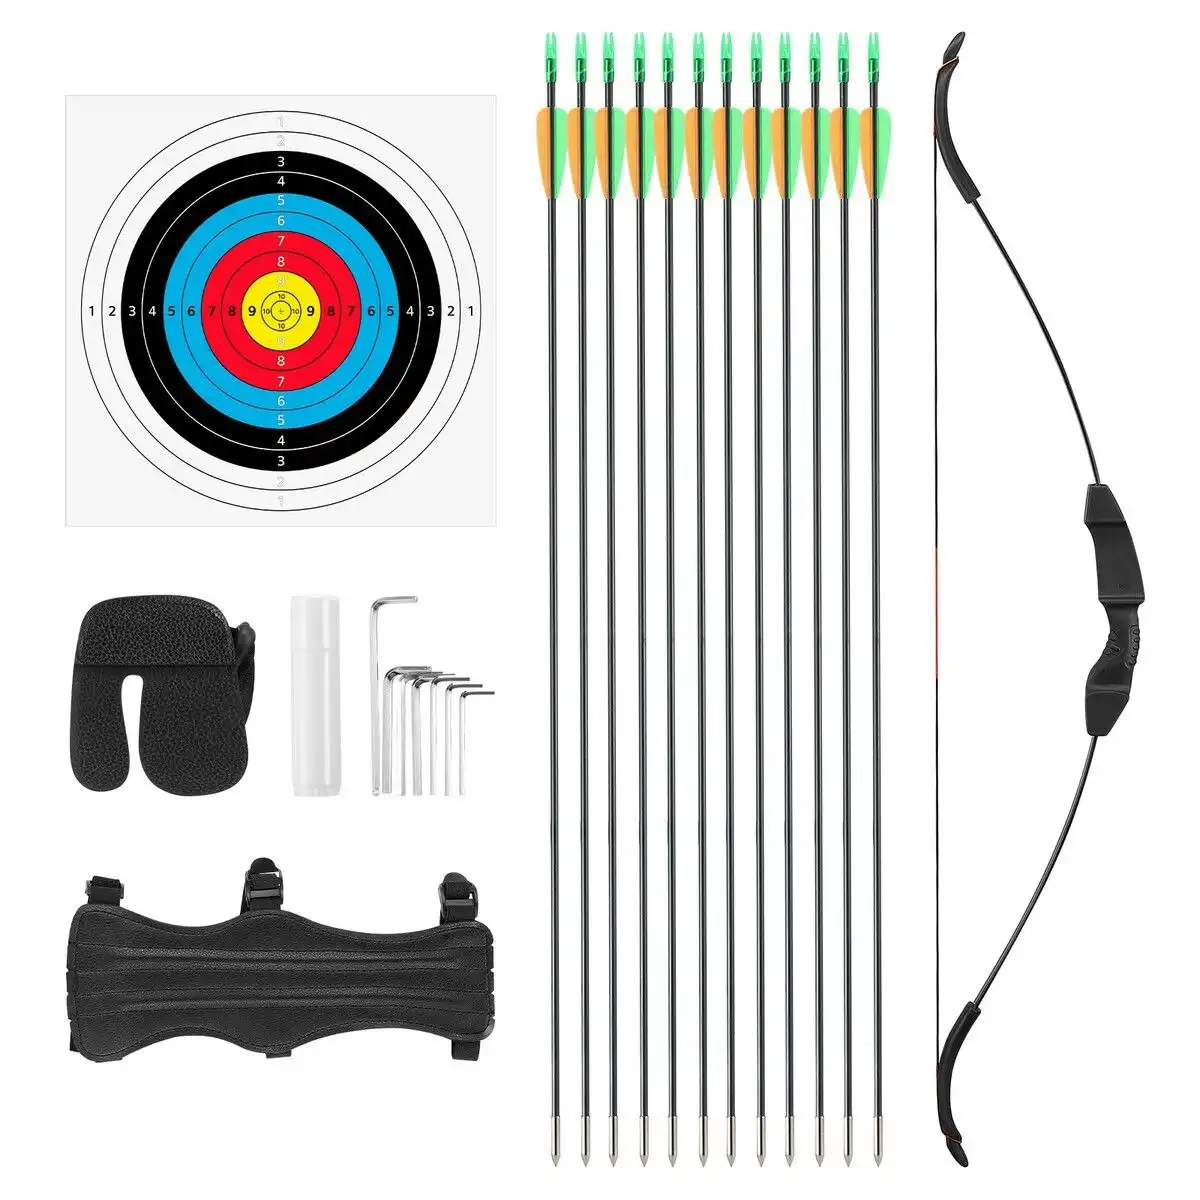 Ausway 30lbs Recurve Bow Arrow Set Archery Sports Equipment Outdoor Hunting Target Shooting 30lbs Left Right Handed Black